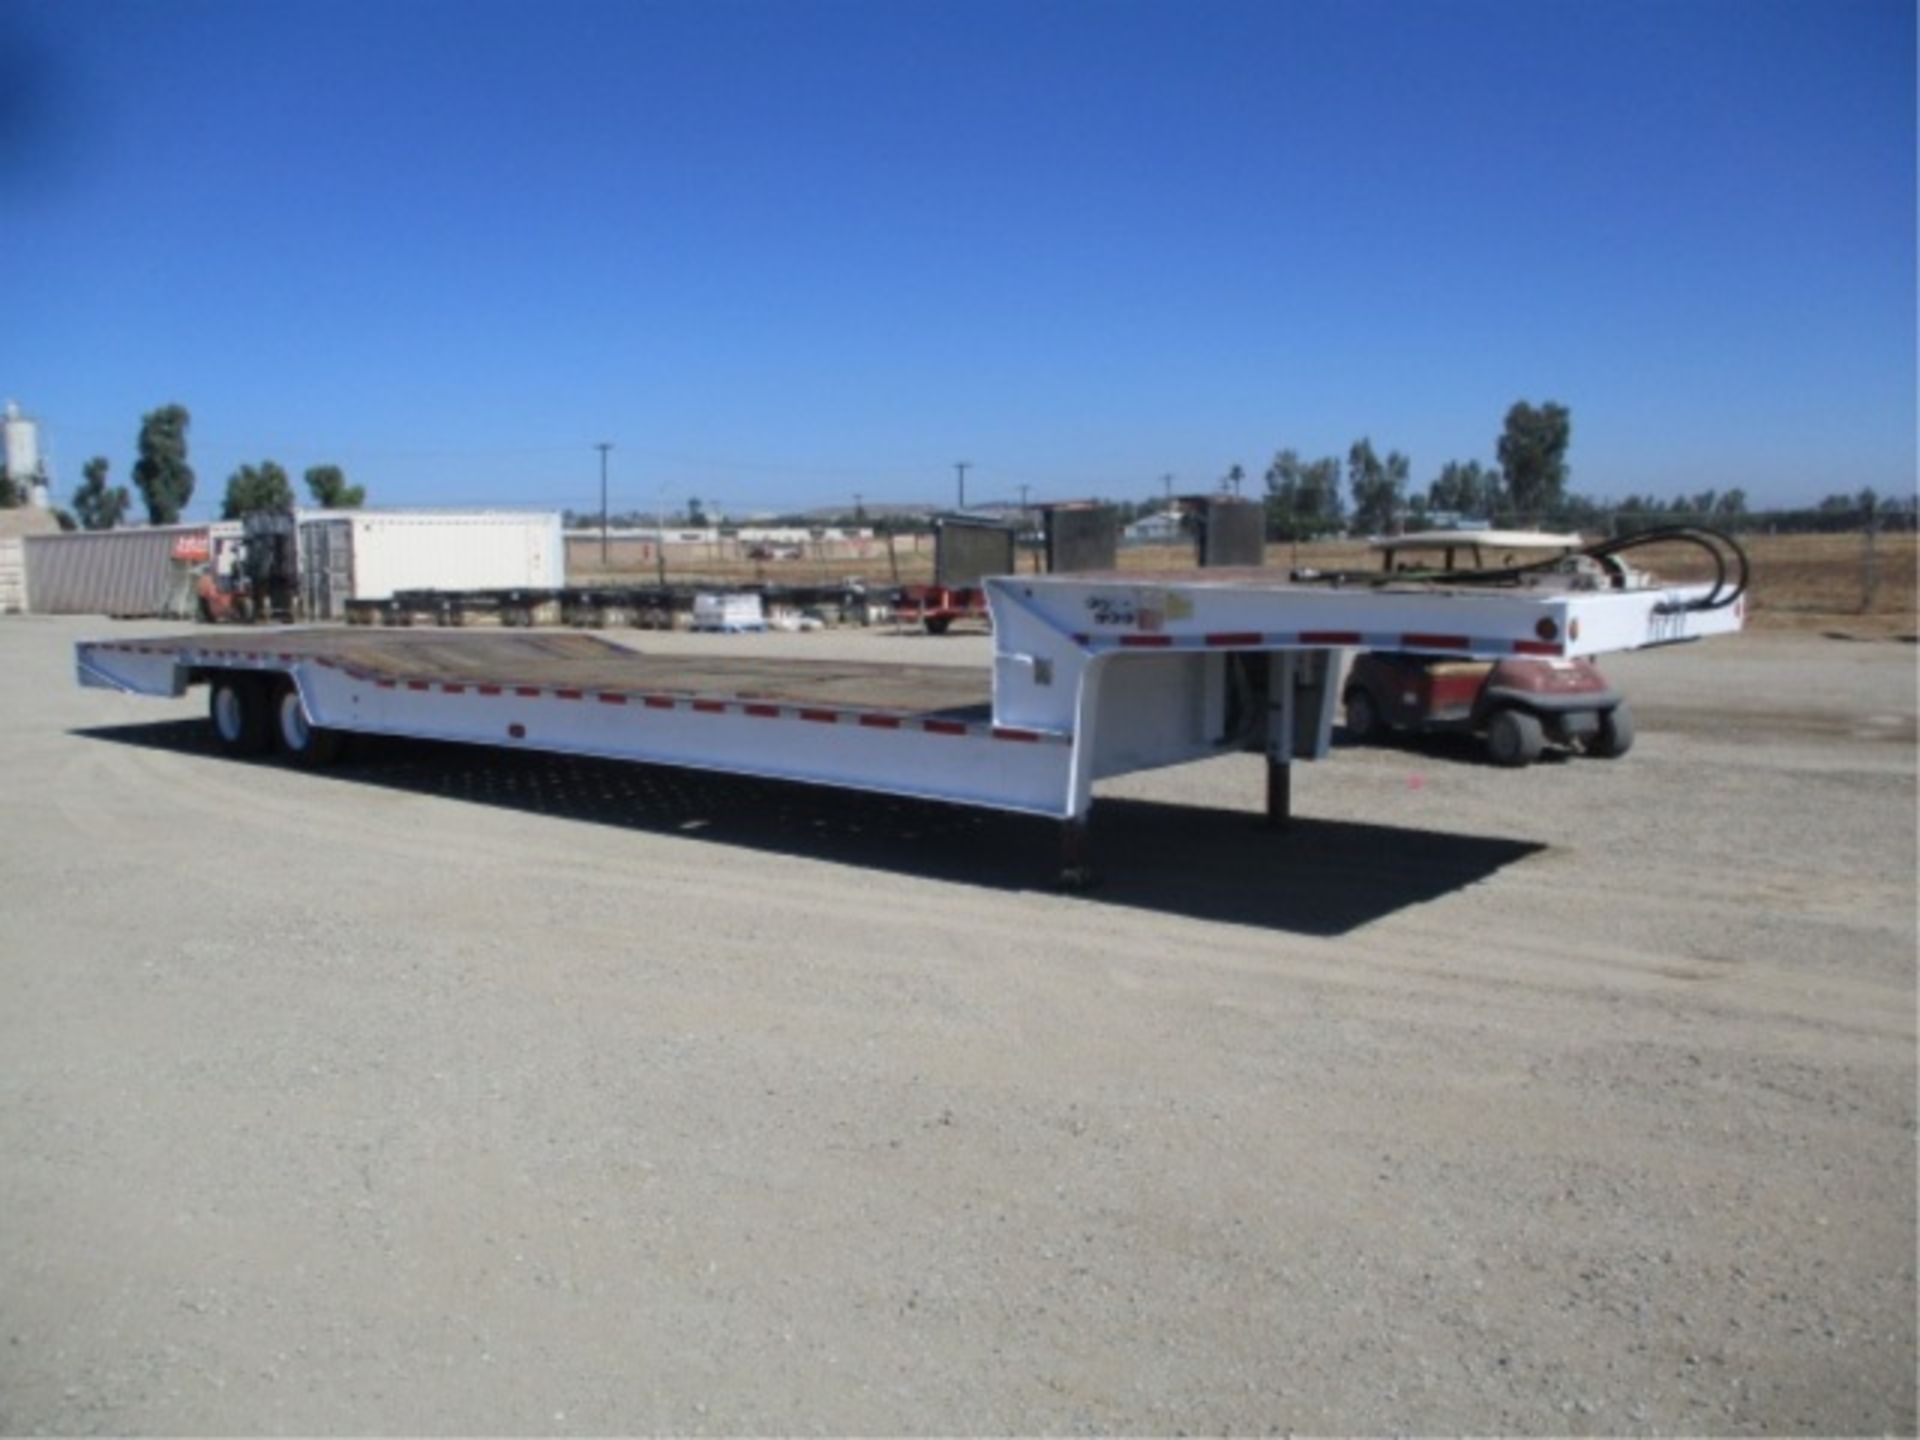 2000 Trail King TK70HT-482 T/A Equipment Trailer, 48', Wood Deck, Hydraulic Dove Tail, 10' Upper - Image 6 of 88